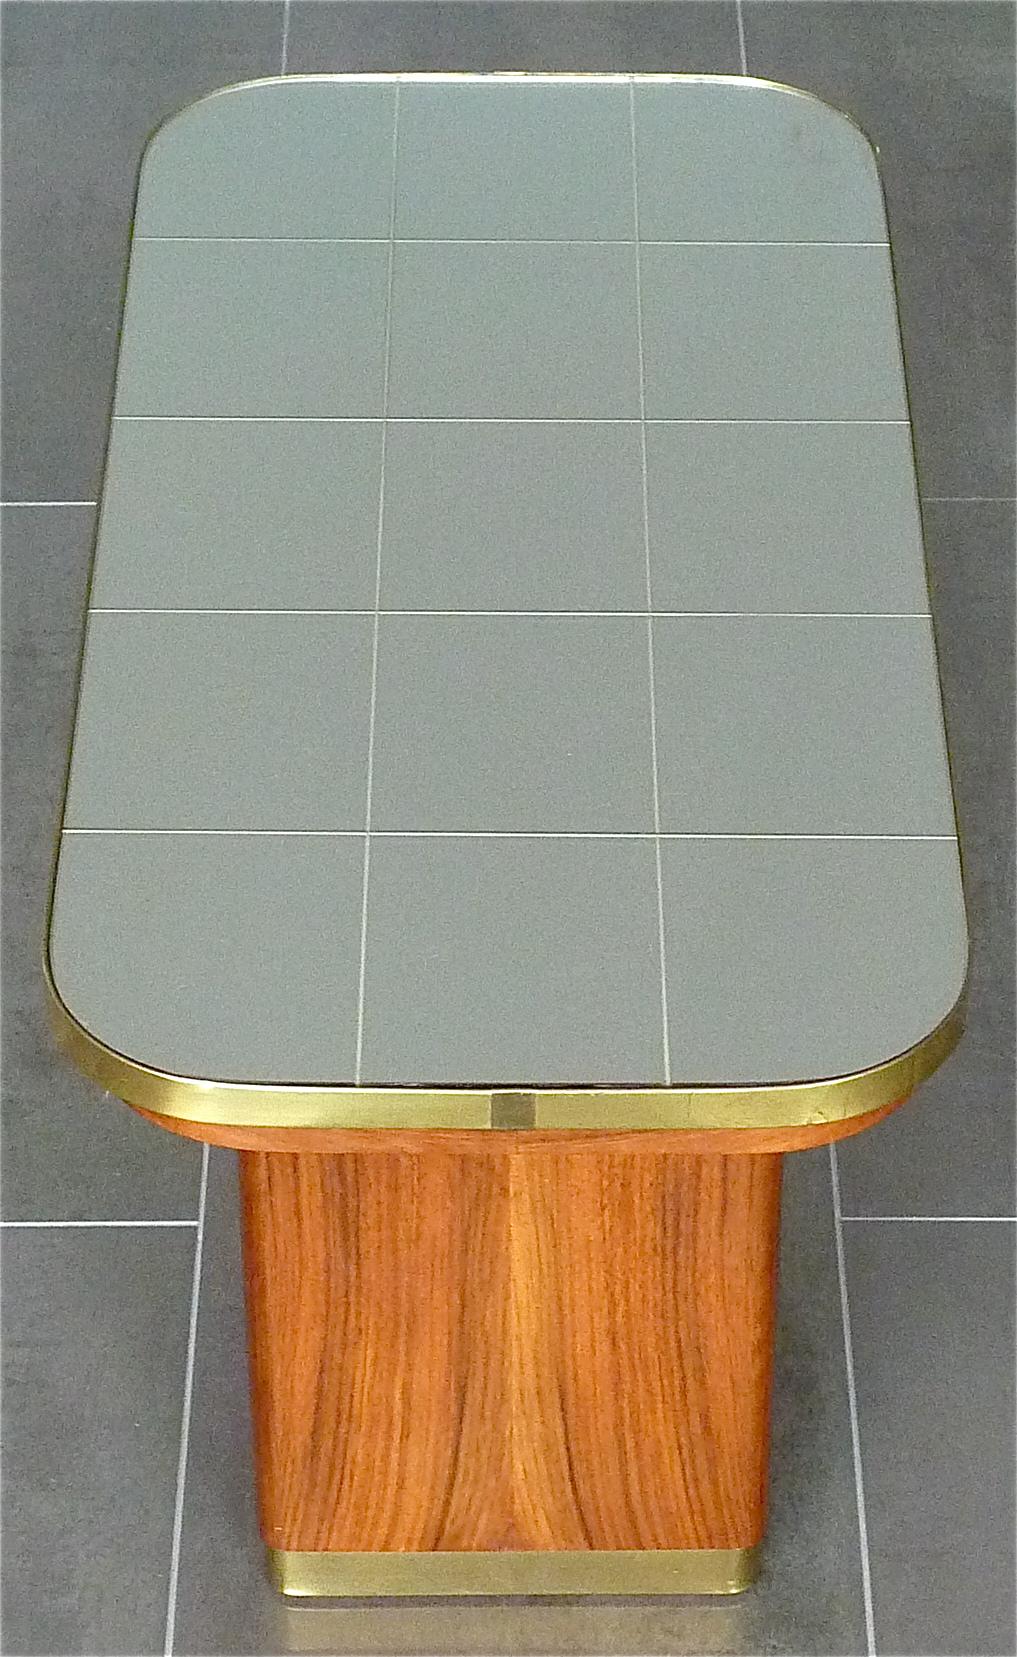 Italian Midcentury Couch Side Table Gio Ponti Style Walnut Brass Mirror Glass For Sale 1